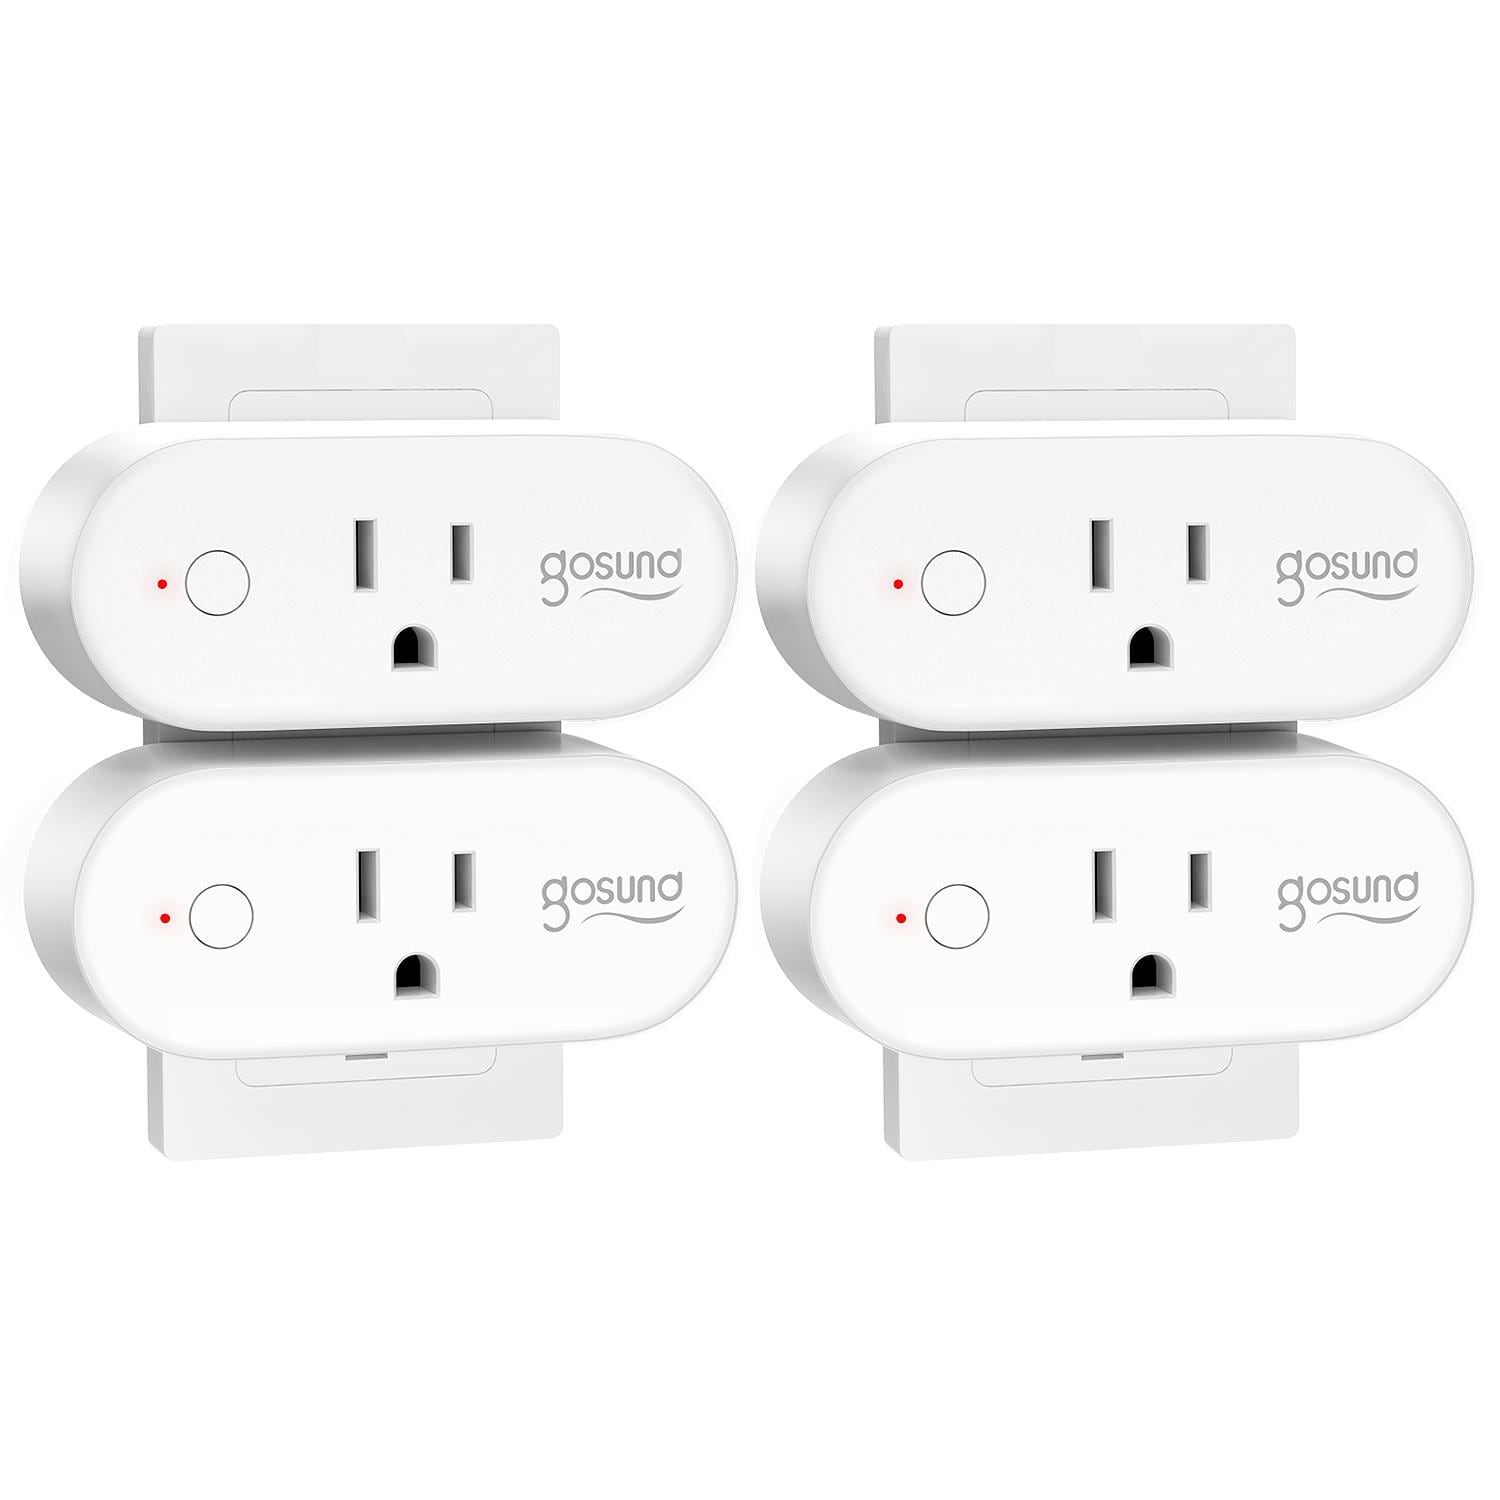 Smart Plug Gosund 16A Smart Home Wifi Outlet Work with Alexa Google Home,4 Pack Mini Socket with Timer Function and Overload Protection FCC ETL Certification Support High Power Appliance 